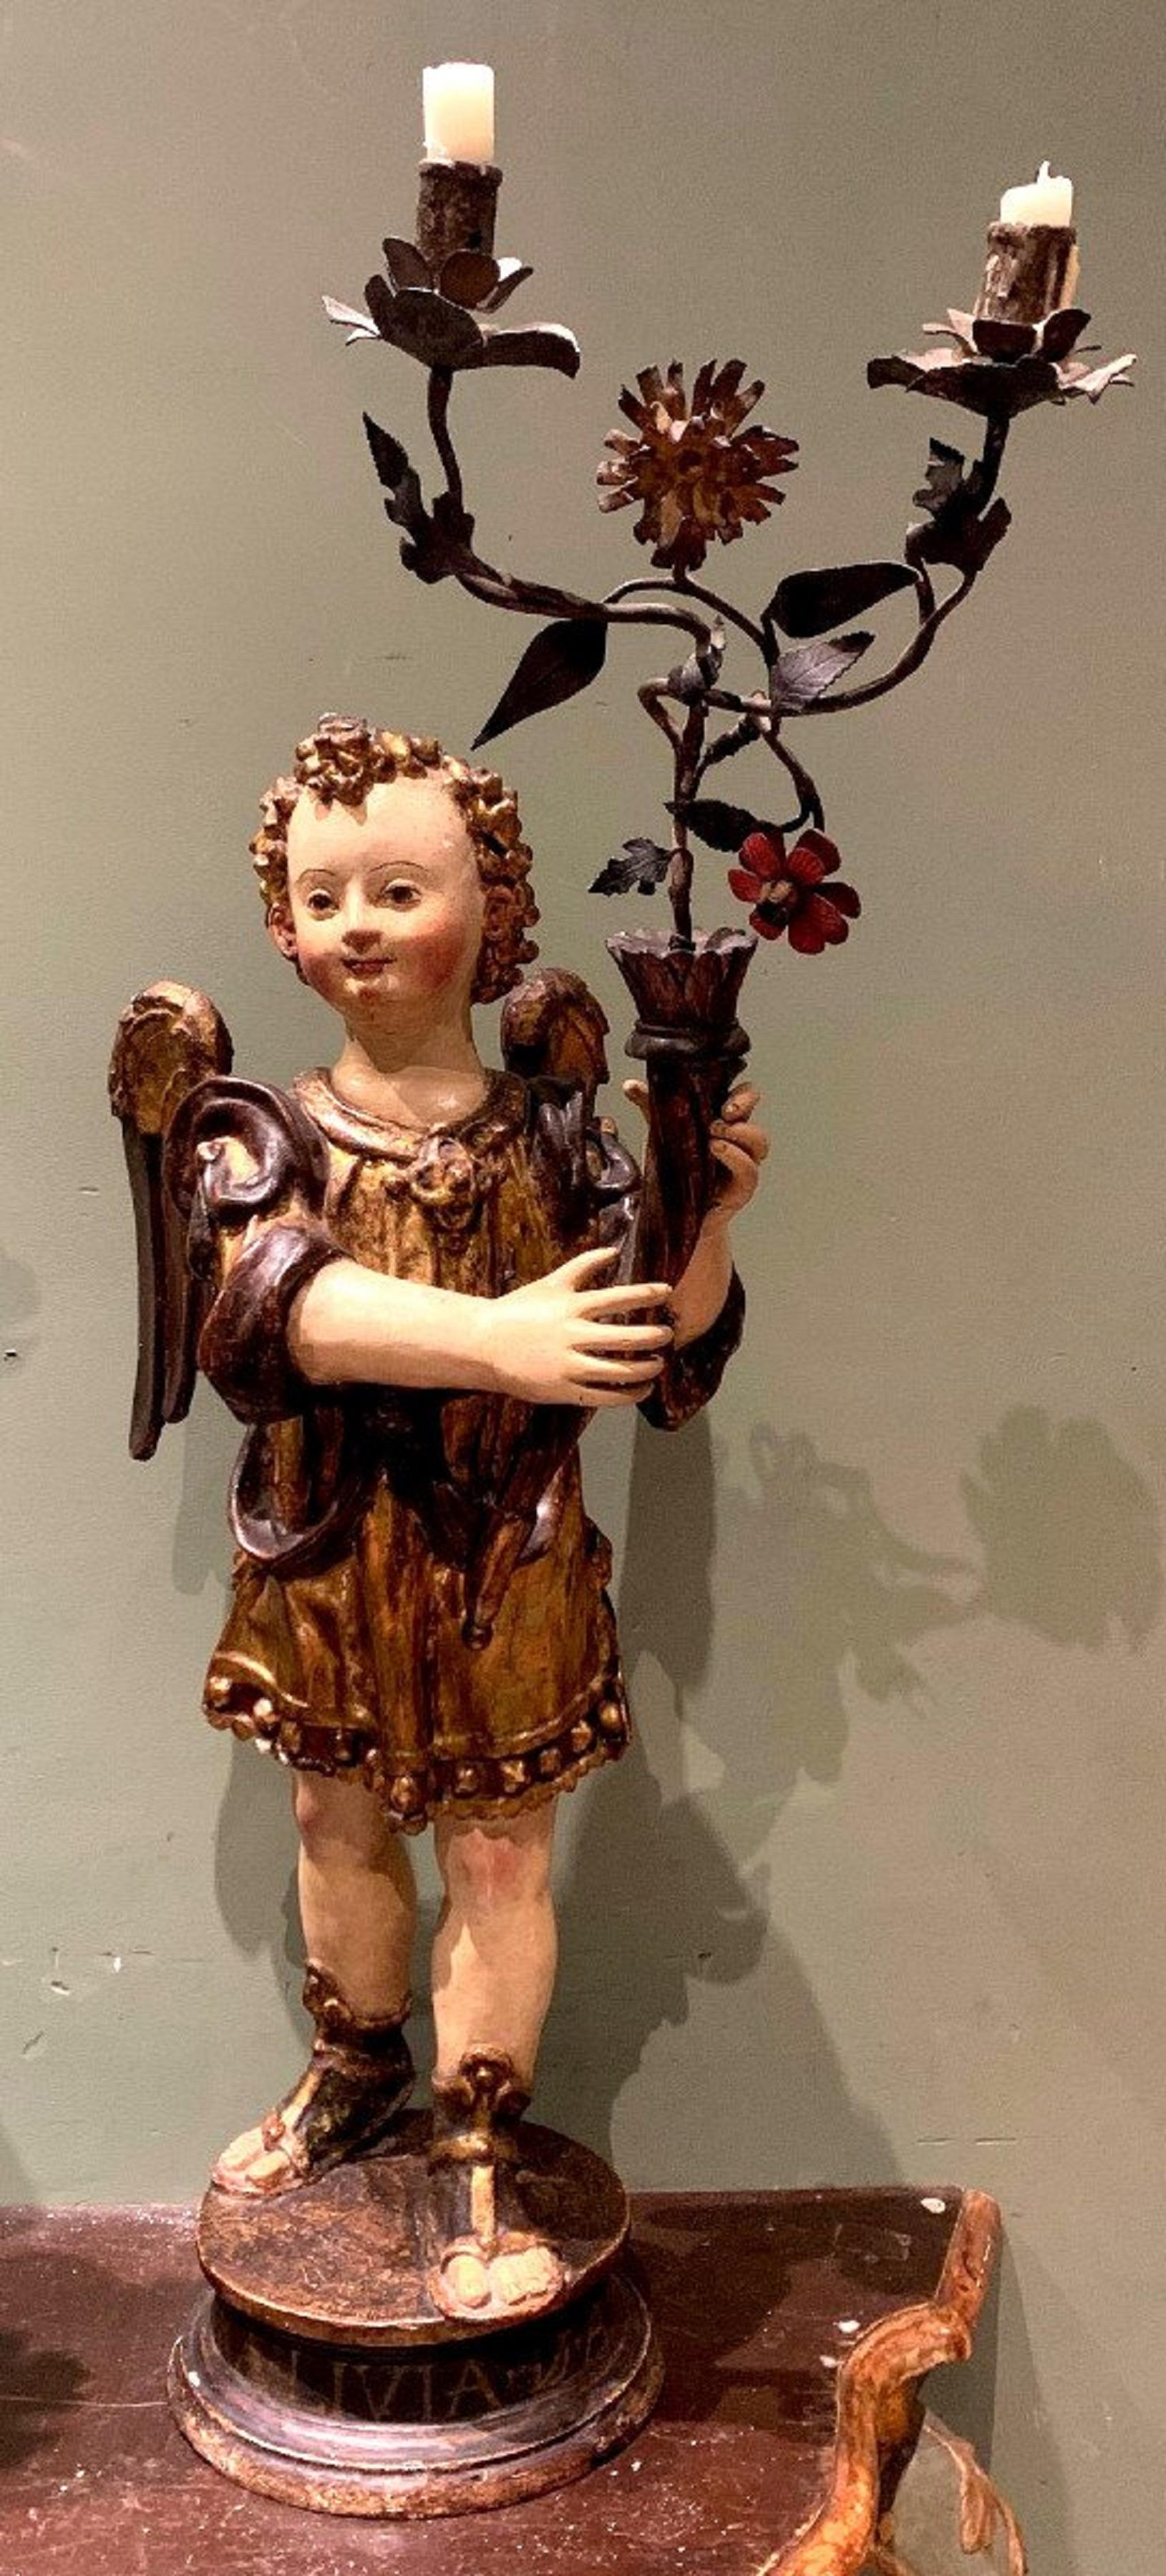 Pair of angels in polychrome and gilded wood.
They each carry a cornucopia receiving two iron arms of light decorated with flowers and foliage.
Charming expression of these smiling angels.
Very good state of preservation.
Molded circular bases